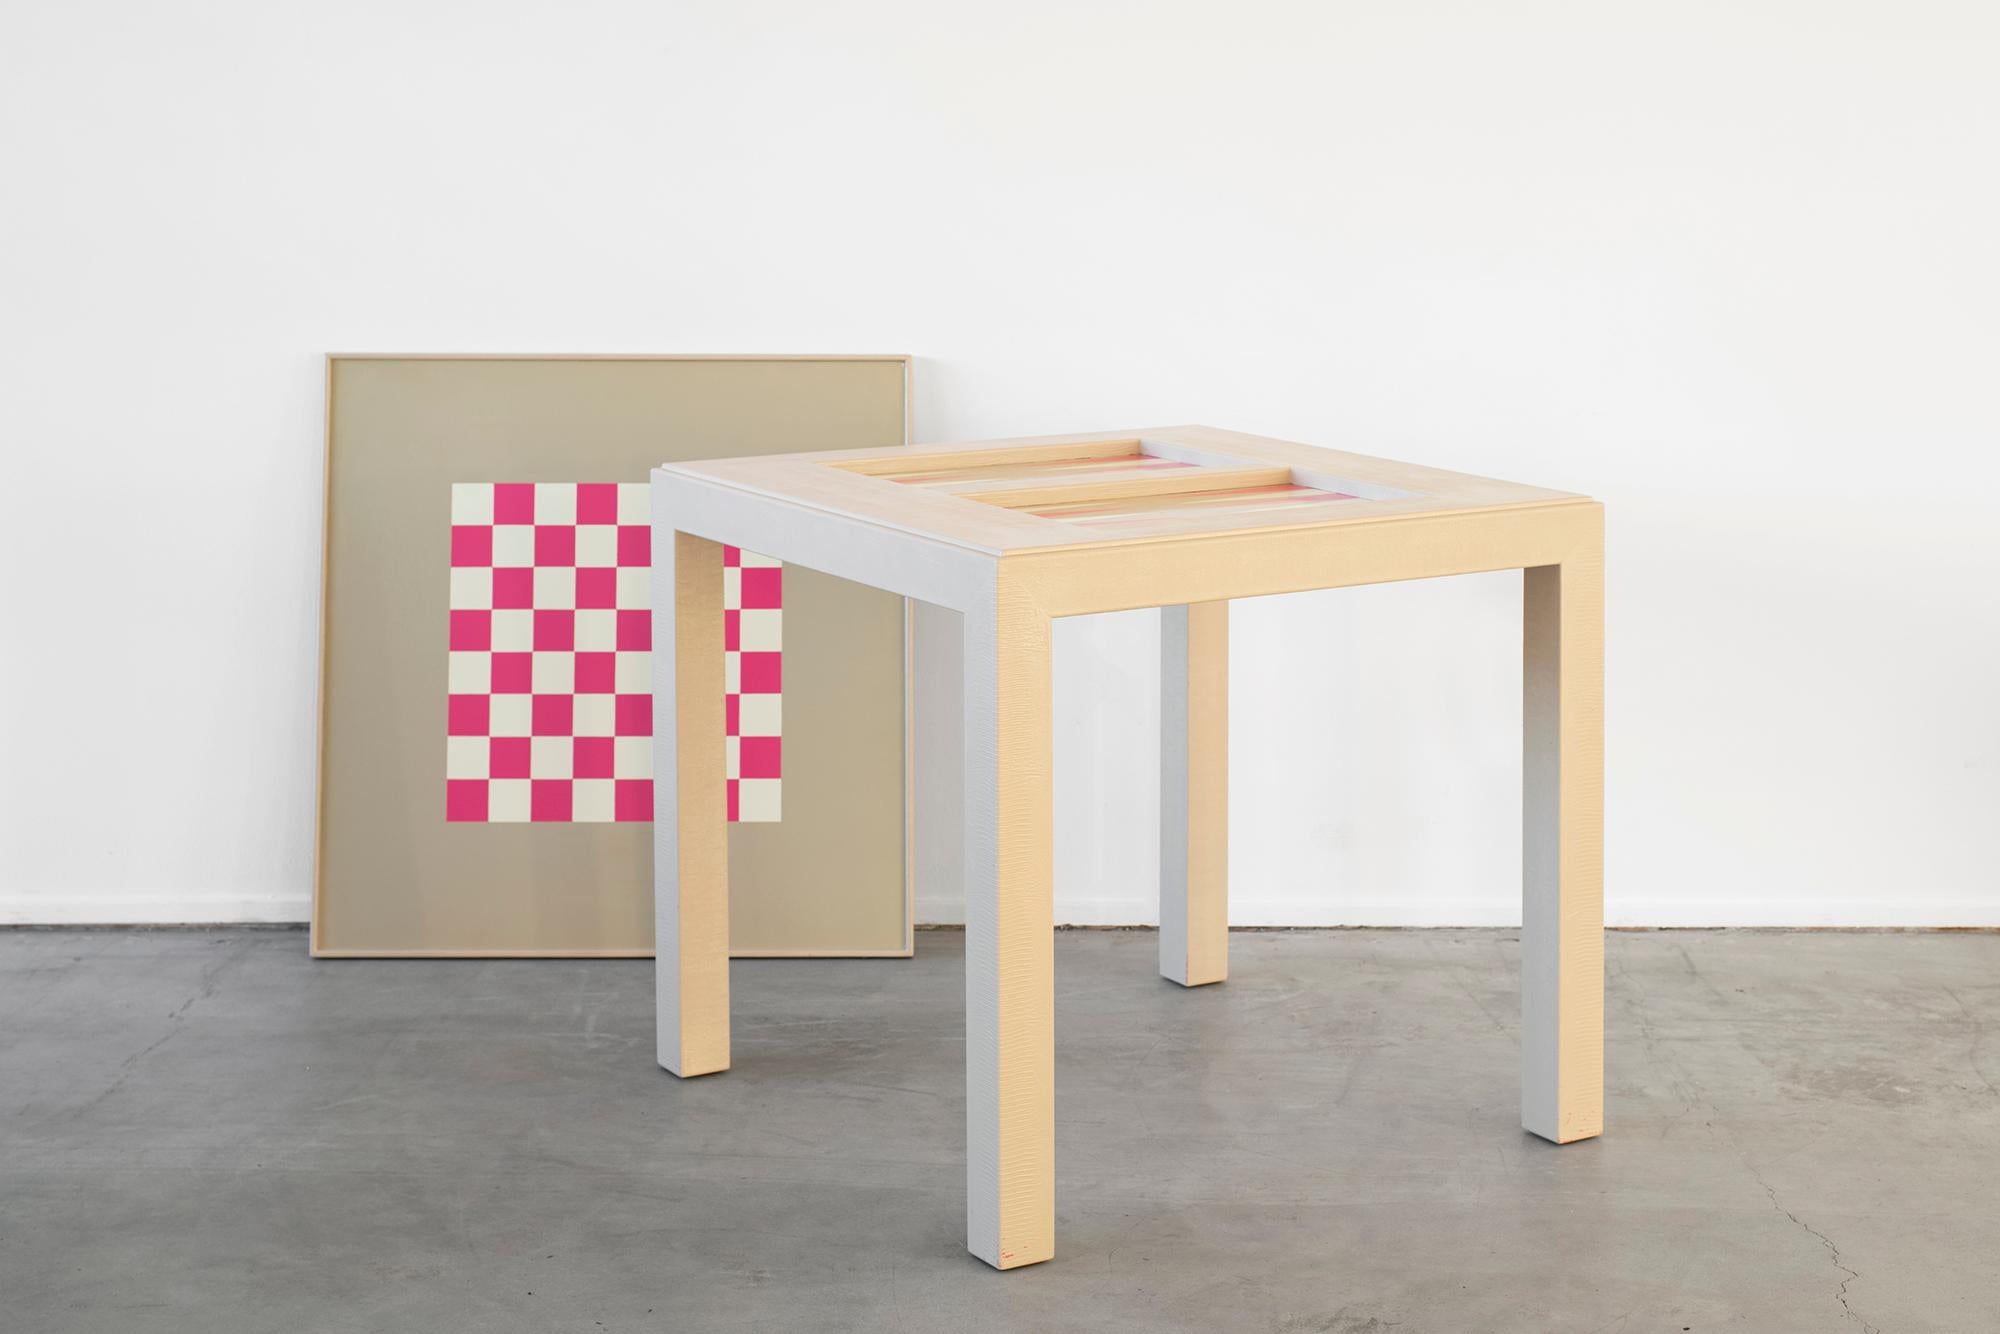 Wonderful gam table with bright pink backgammon or chess boards, attributed to Karl Springer.
Covered in faux-snakeskin with removable top revealing a checkerboard underside and backgammon inset.
Measures: 30in tall x 32in wide x 32in deep.